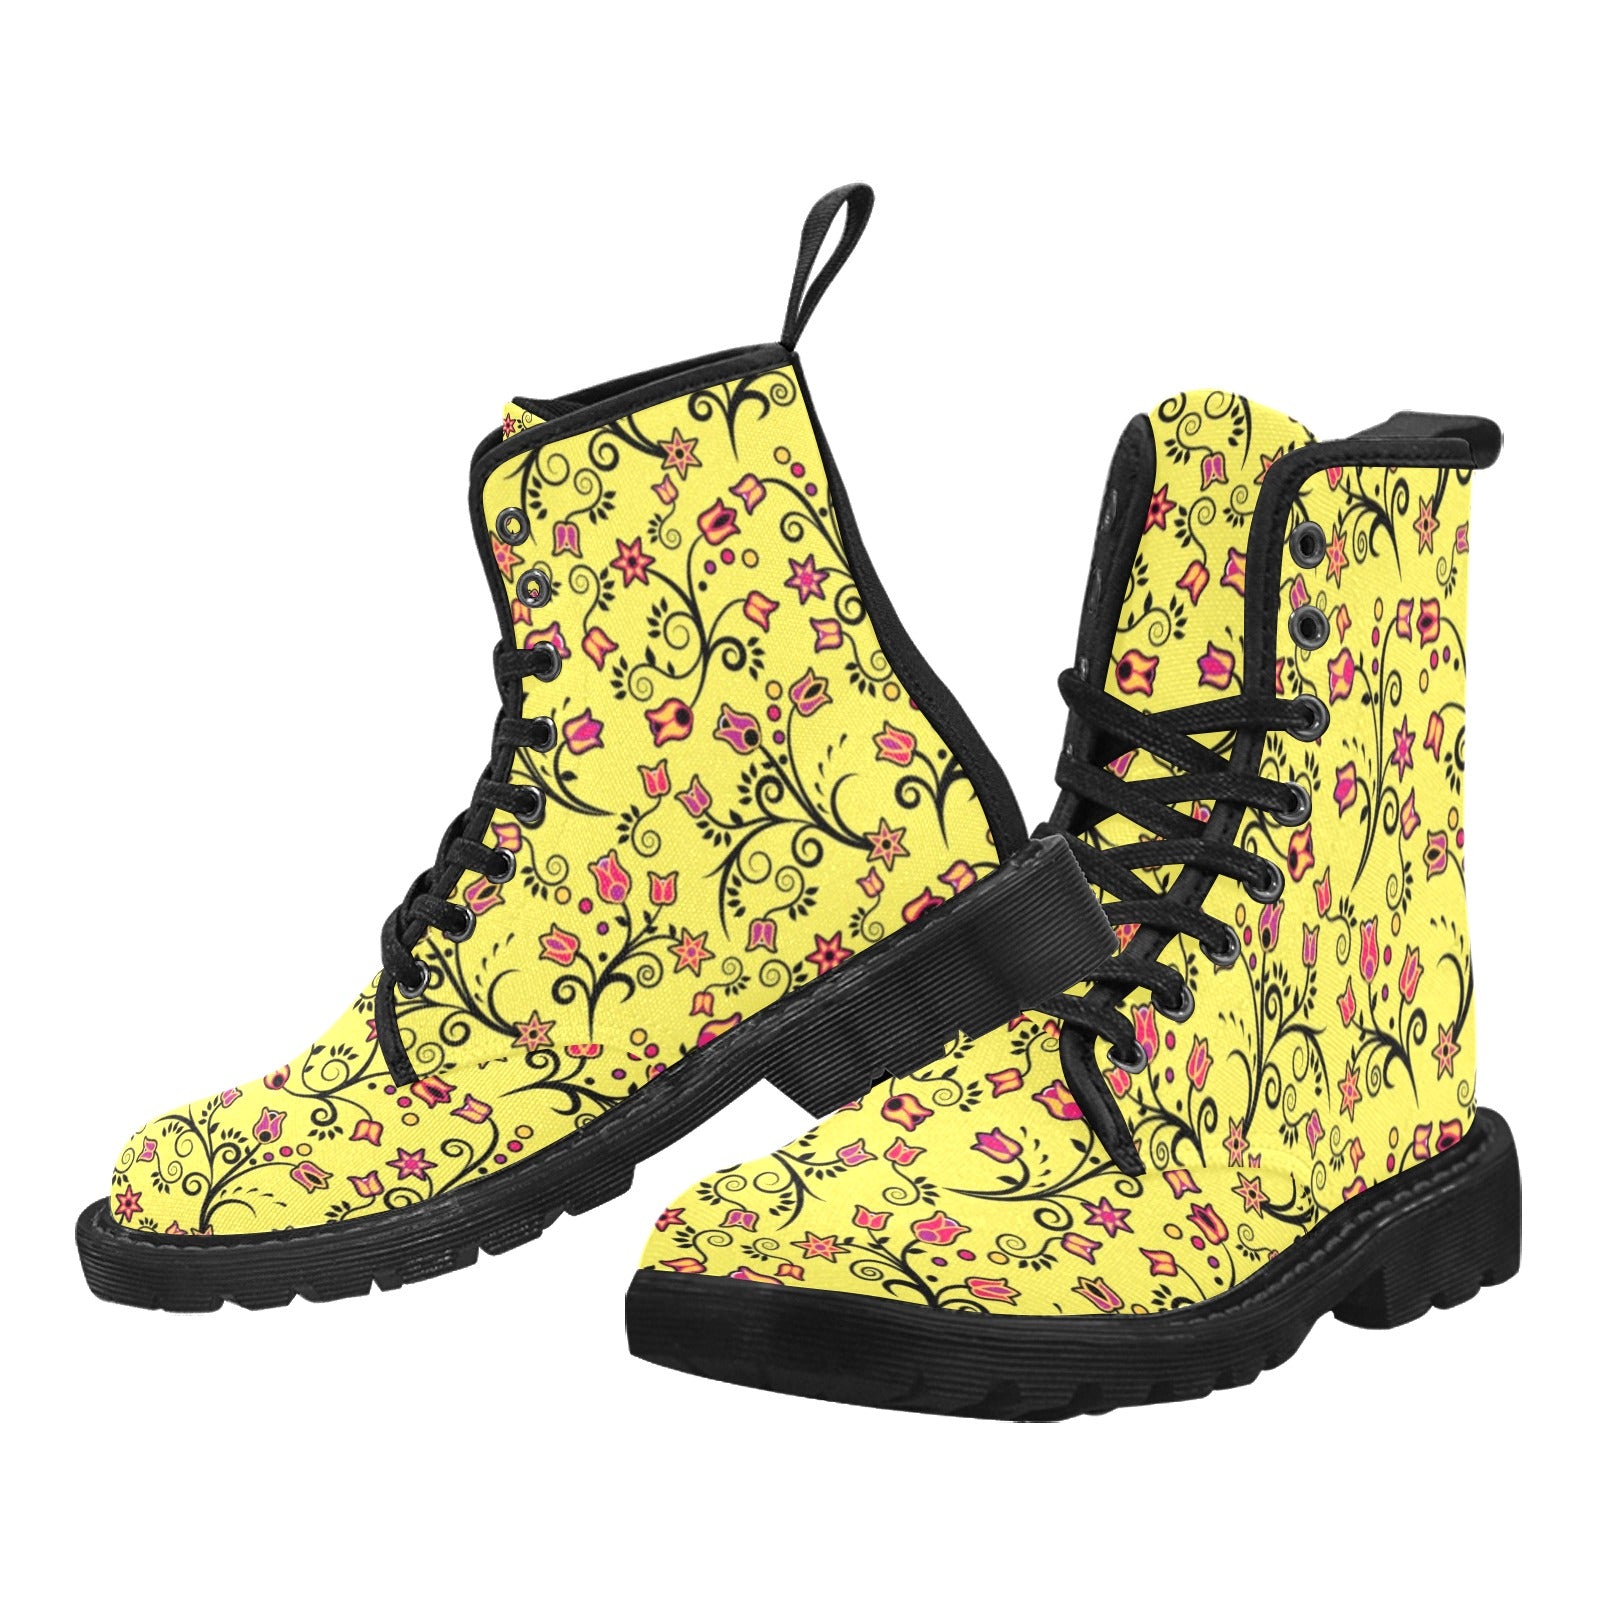 Key Lime Star Boots for Women (Black)